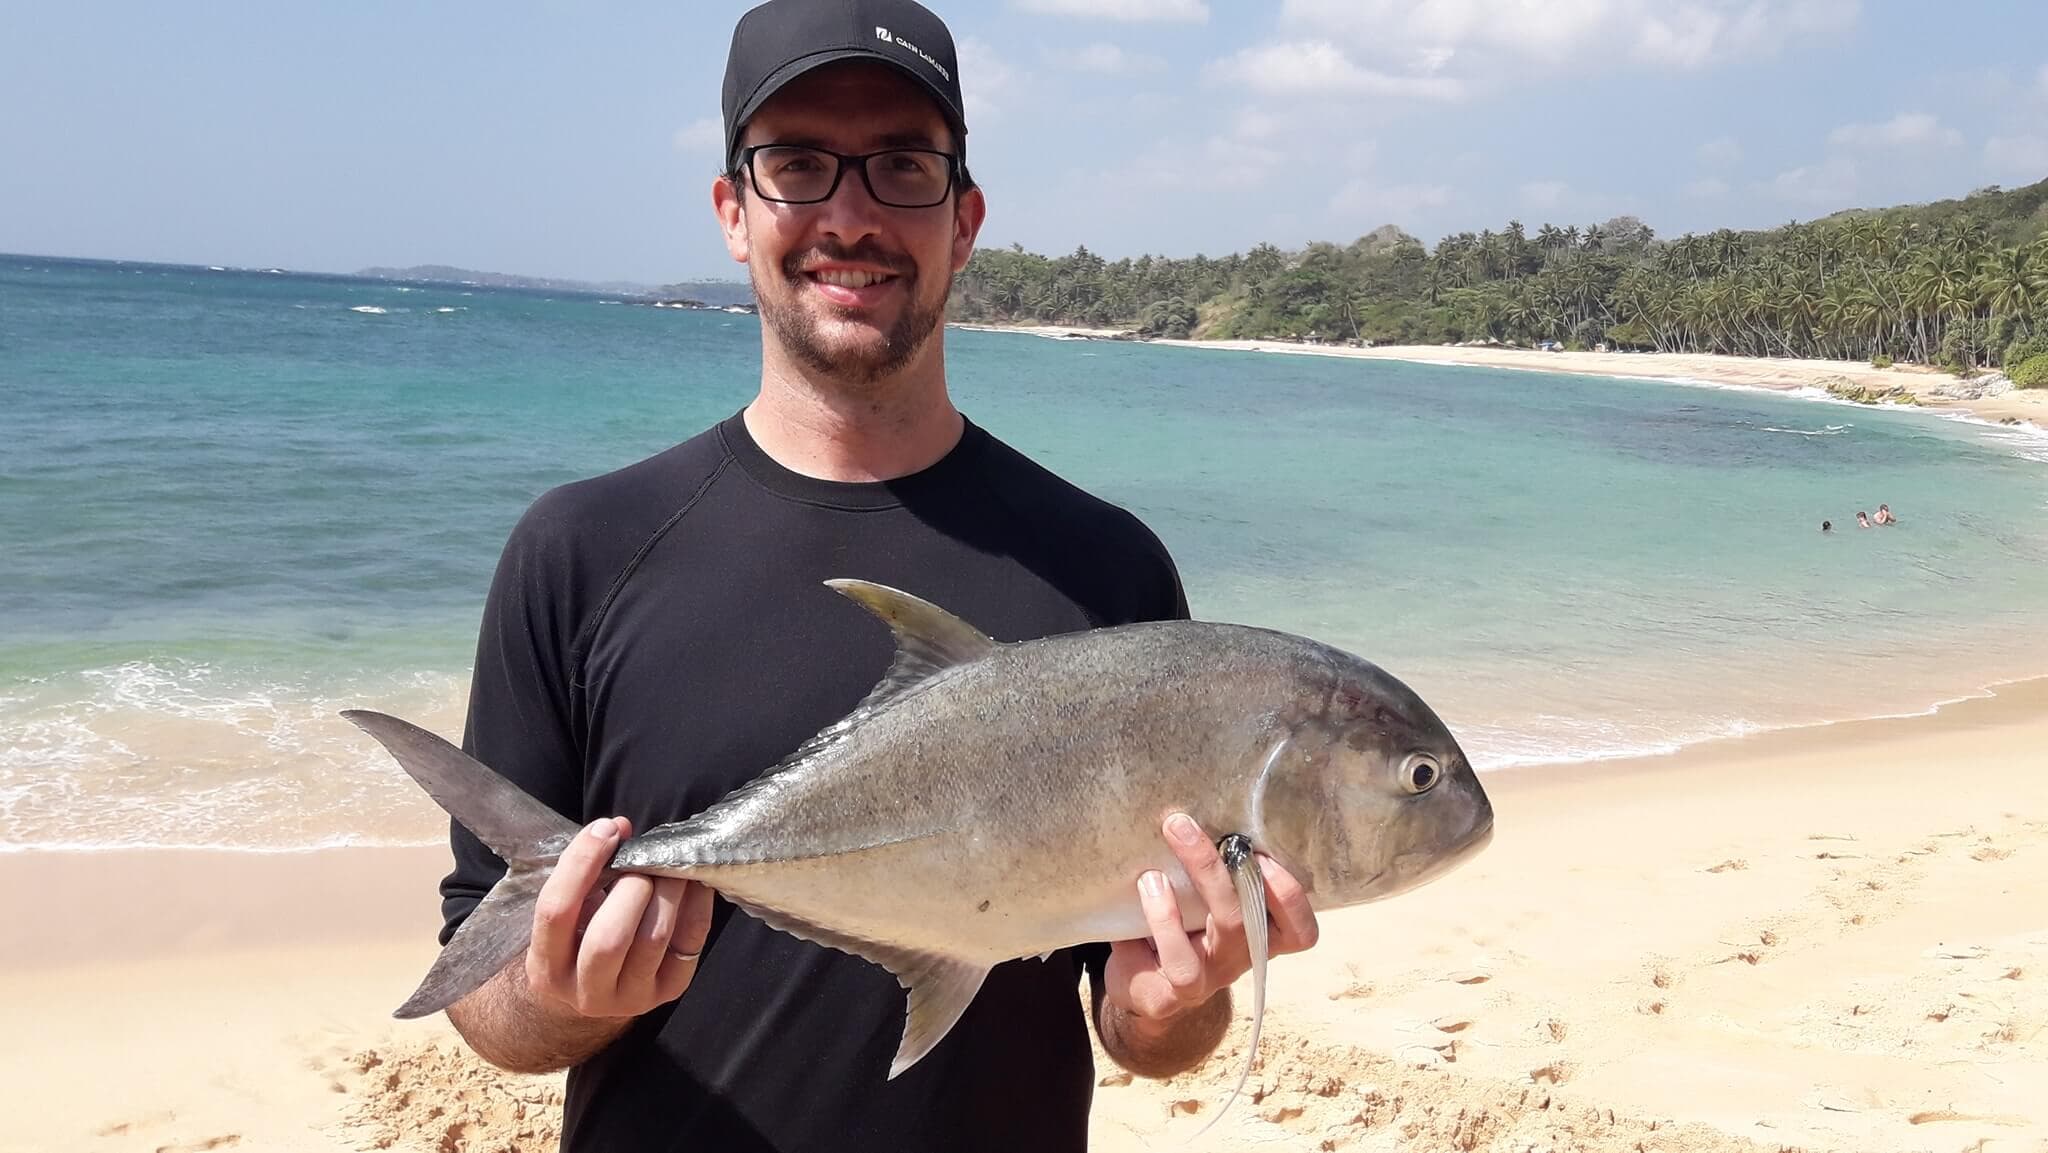 A tourist caught a Trevally fish in the fishing tour in Sri Lanka